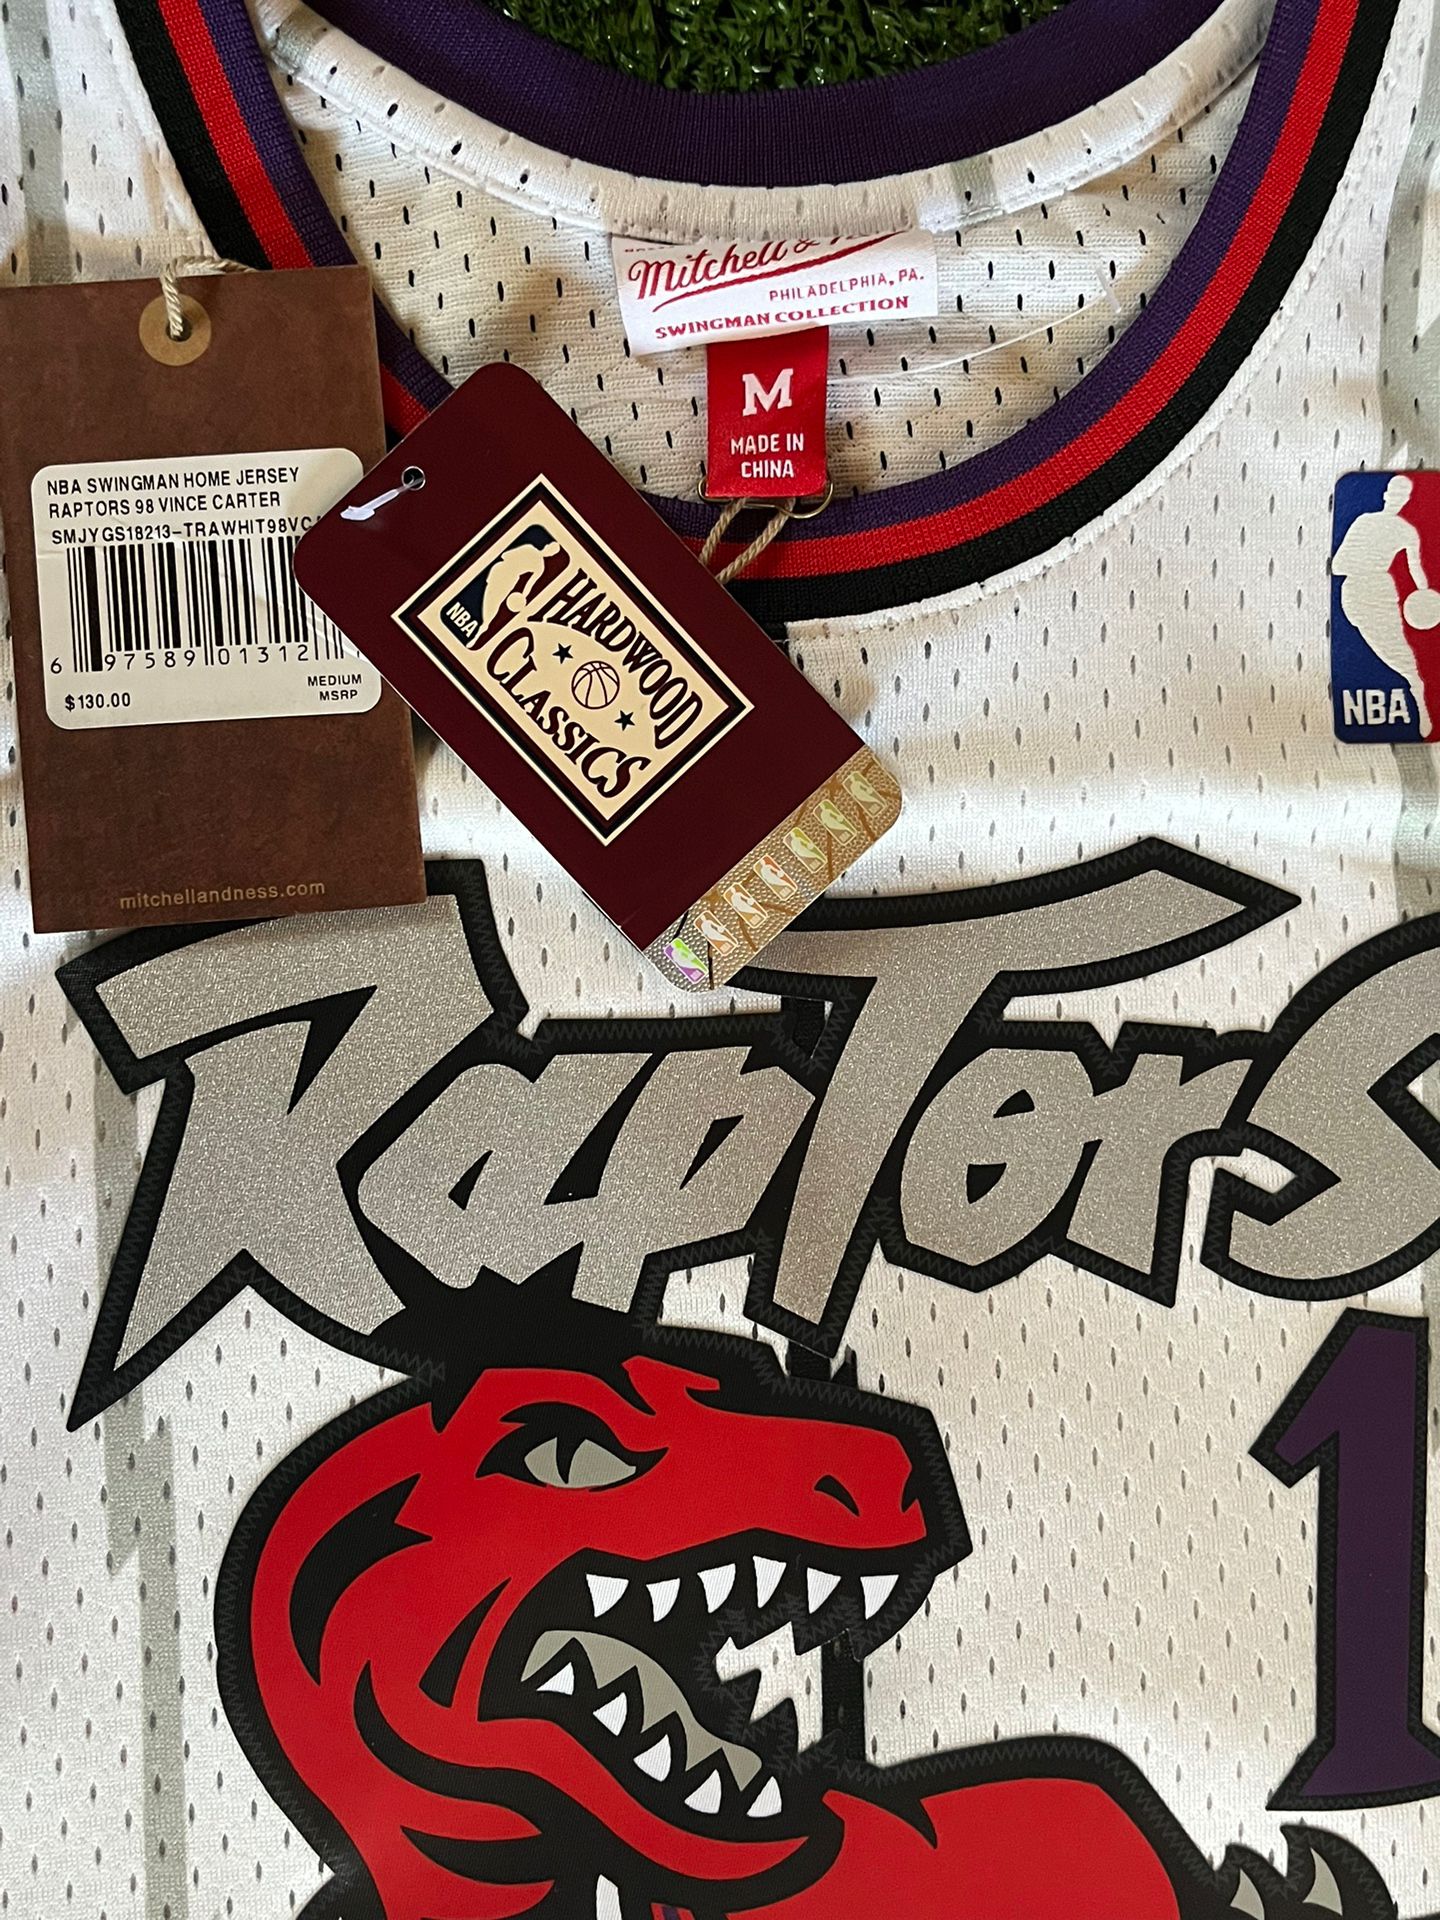 US$ 26.00 - Raptors KNOW YOURSELF #6 White Retro Top Quality Hot Pressing  NBA Jersey - m.